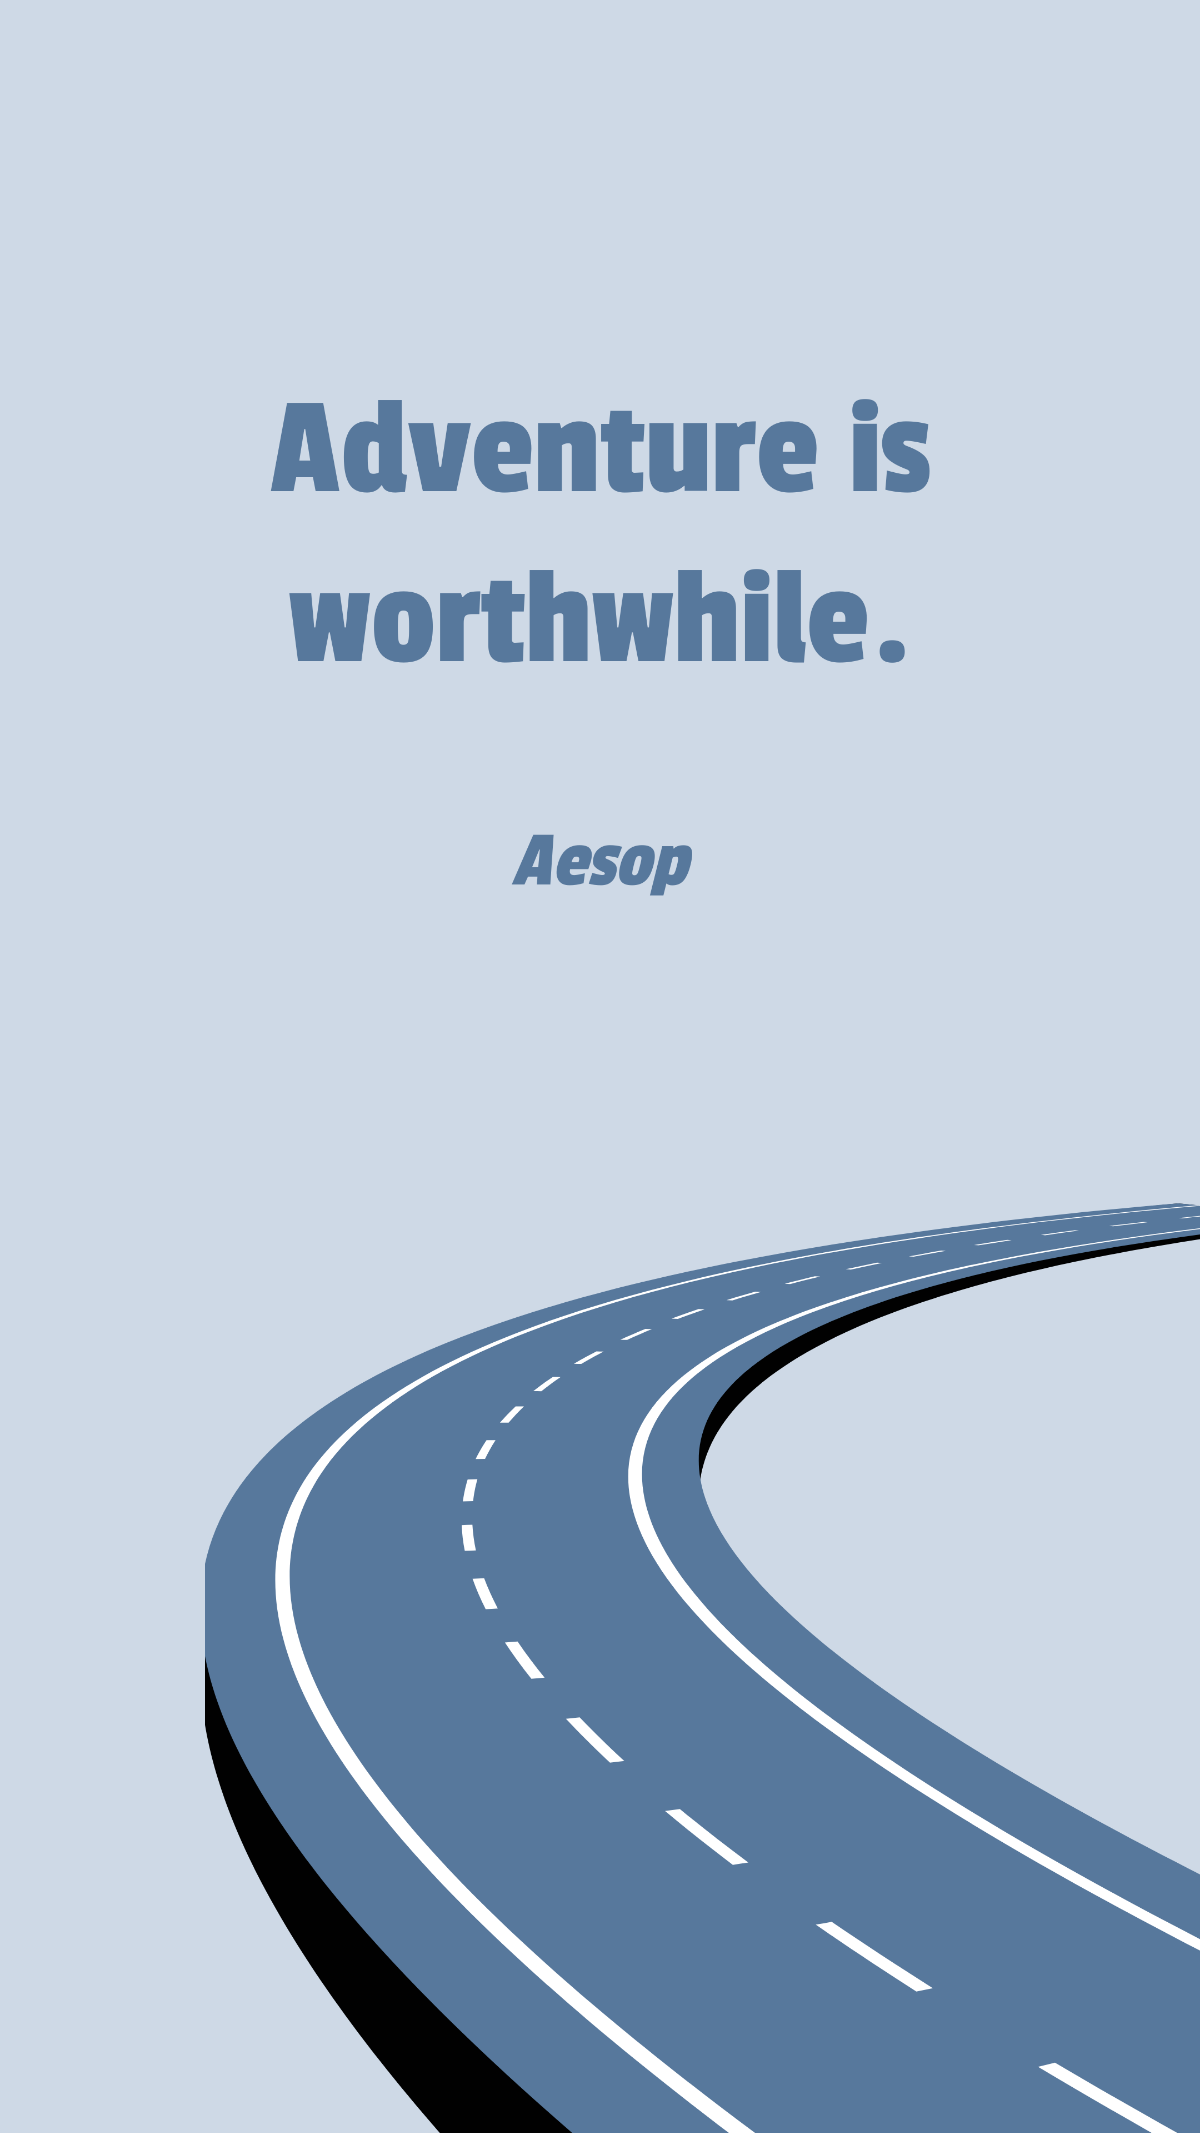 Aesop - Adventure is worthwhile. Template